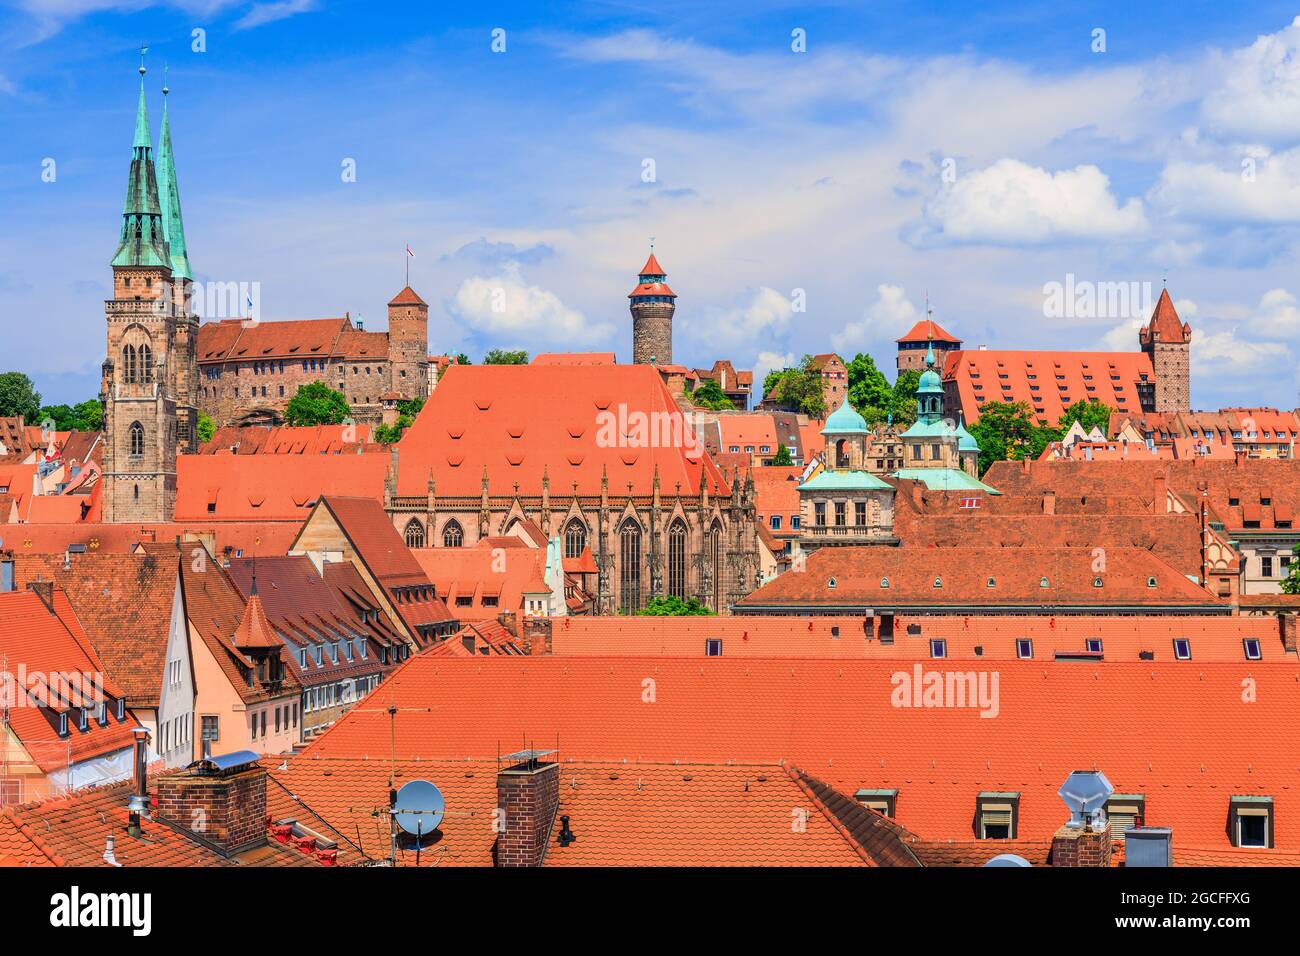 Nuremberg, Germany. The rooftops of the Old Town. Stock Photo